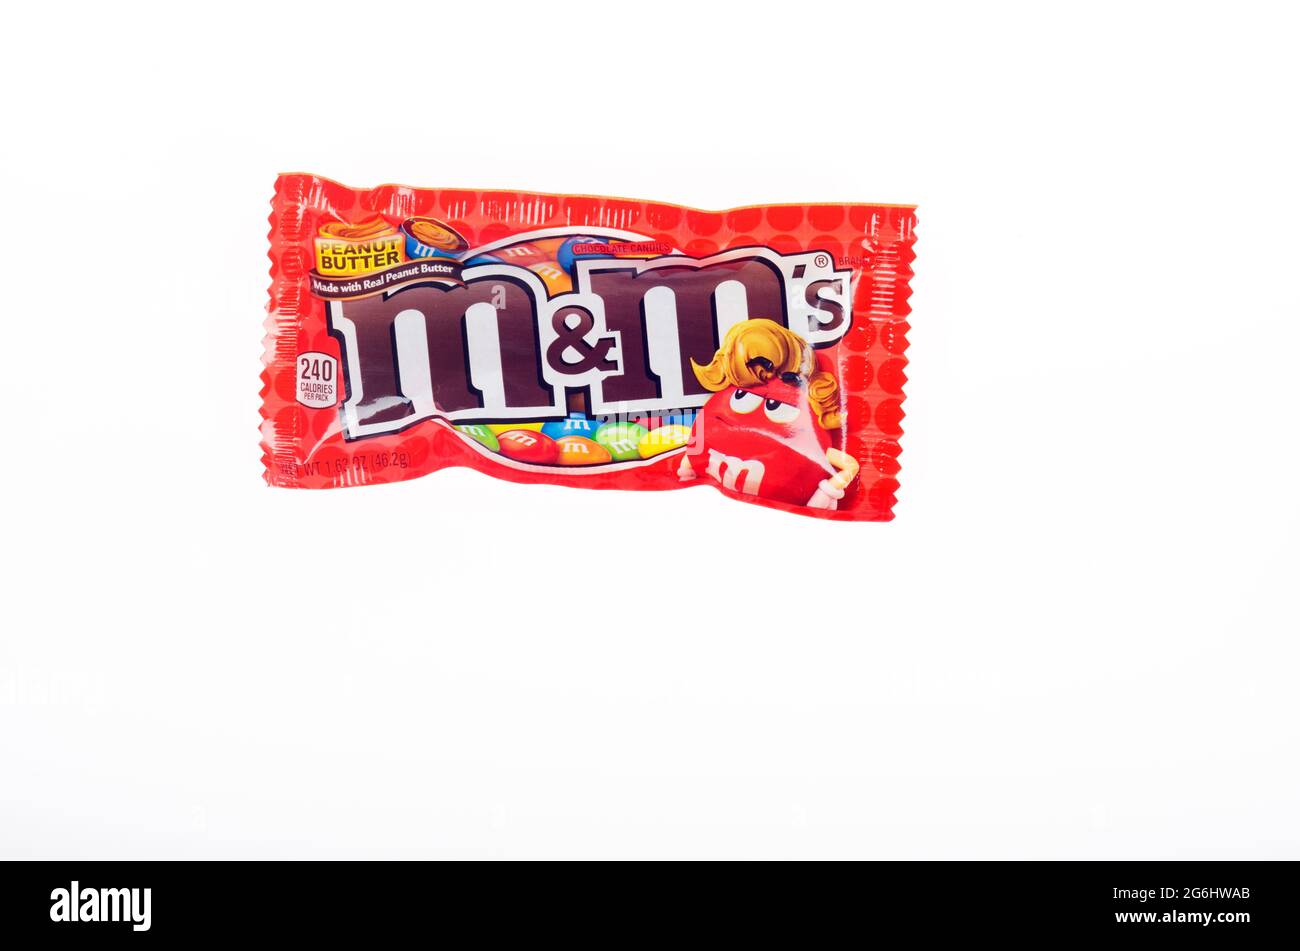 M&m's Panut Butter Candy Packet Banque D'Images